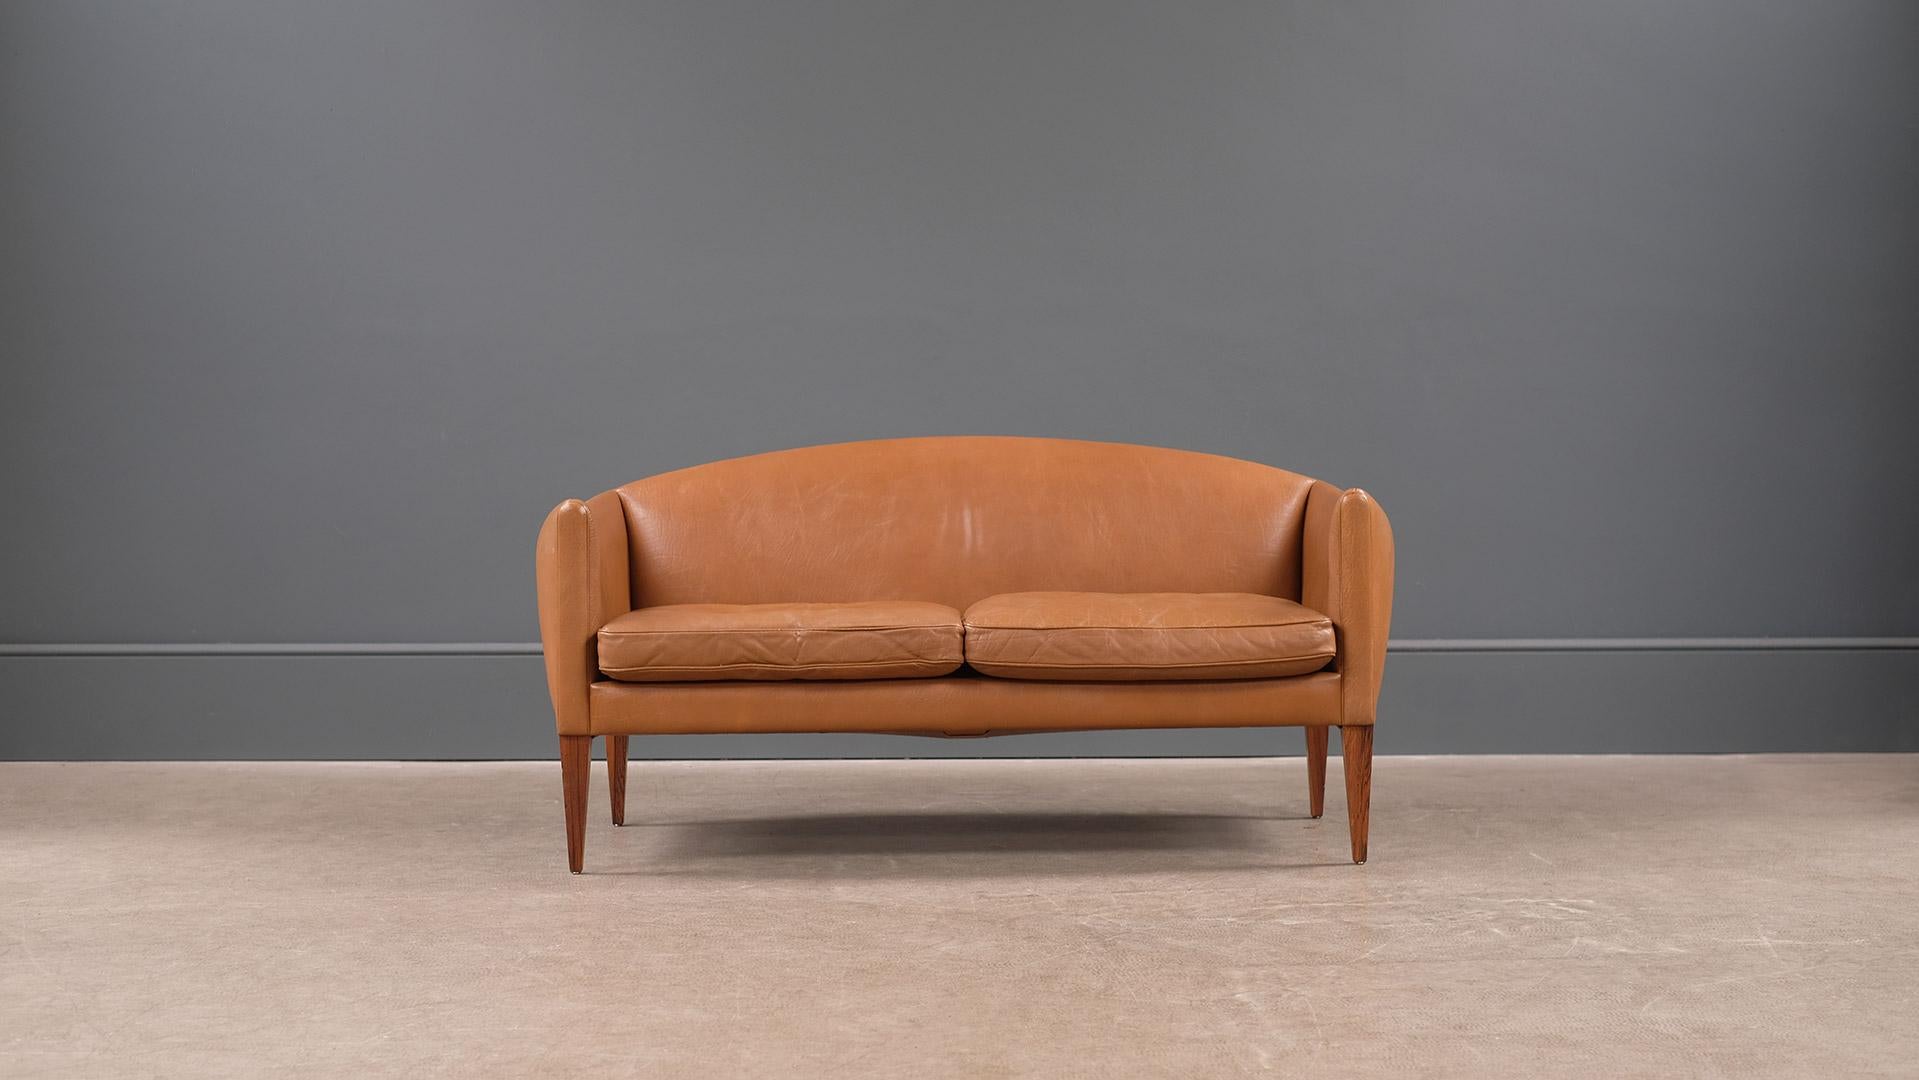 Wonderful super rare small sofa / loveseat designed by Illum Wikkelso for cabinetmaker Holger Christiansen, Denmark. Beautiful proportions, super elegant and very comfortable.